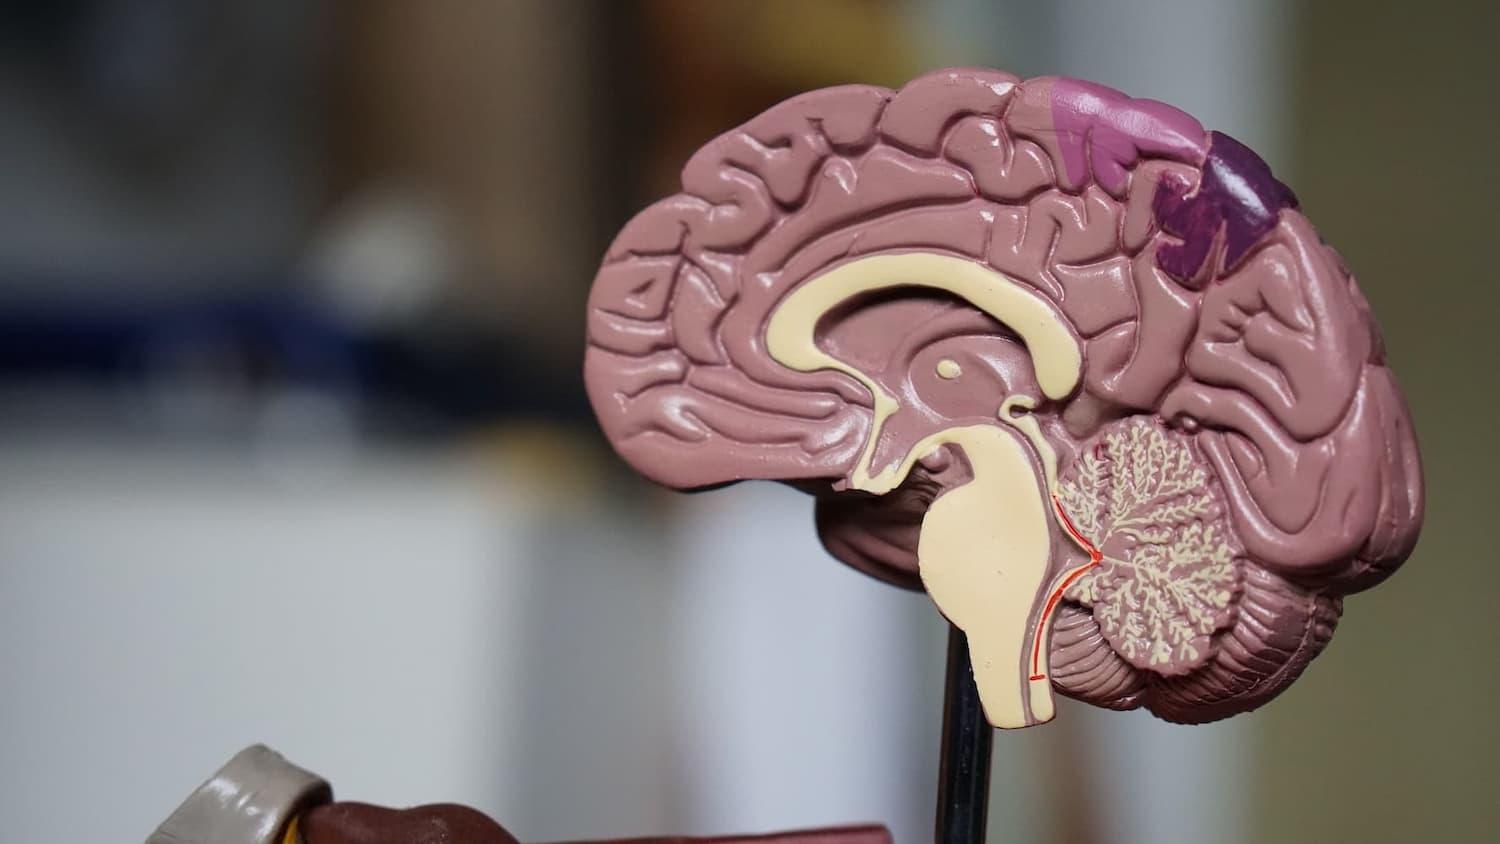 What You Need to Know About the Pituitary Gland